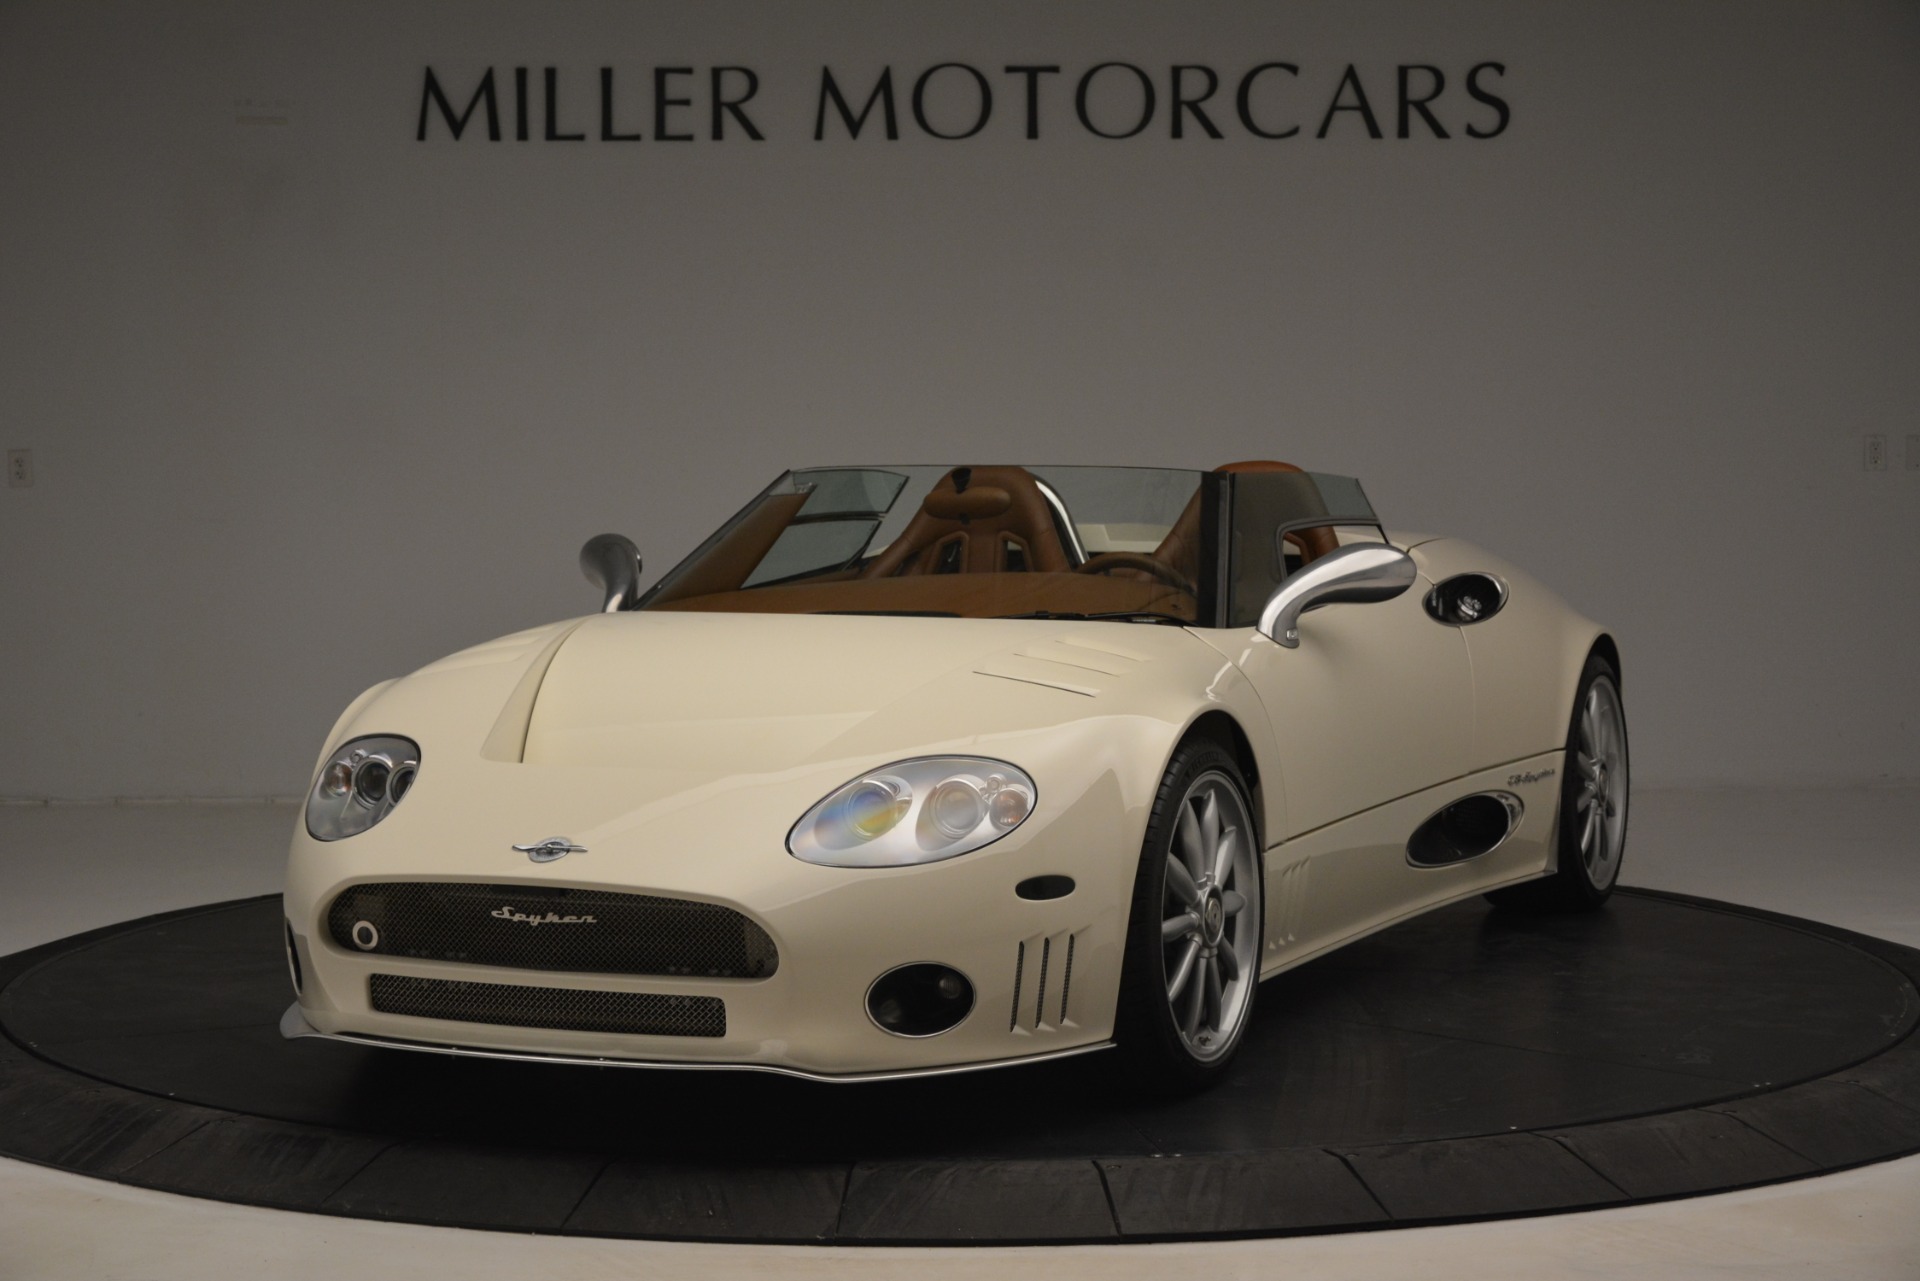 Used 2006 Spyker C8 Spyder for sale Sold at Aston Martin of Greenwich in Greenwich CT 06830 1